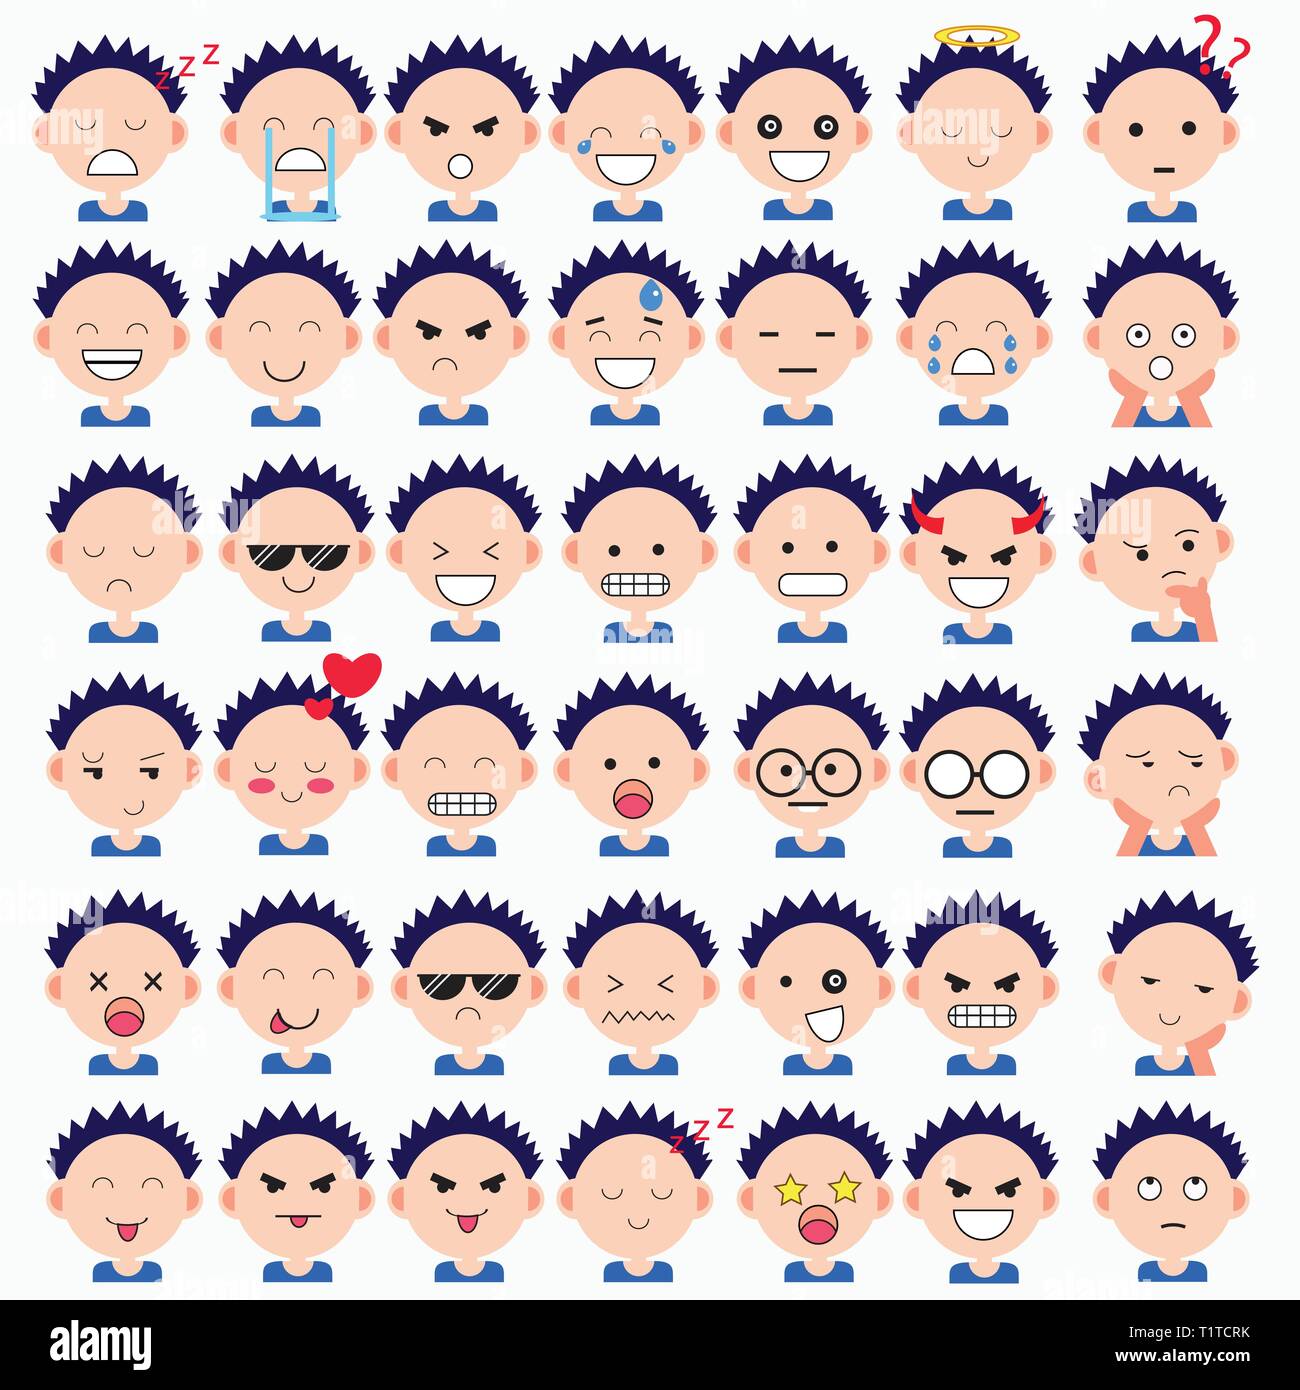 Illustration of cute boy faces showing different emotions. Joy, sadness, anger, talking, funny, fear, smile. Isolated illustration on white background Stock Vector